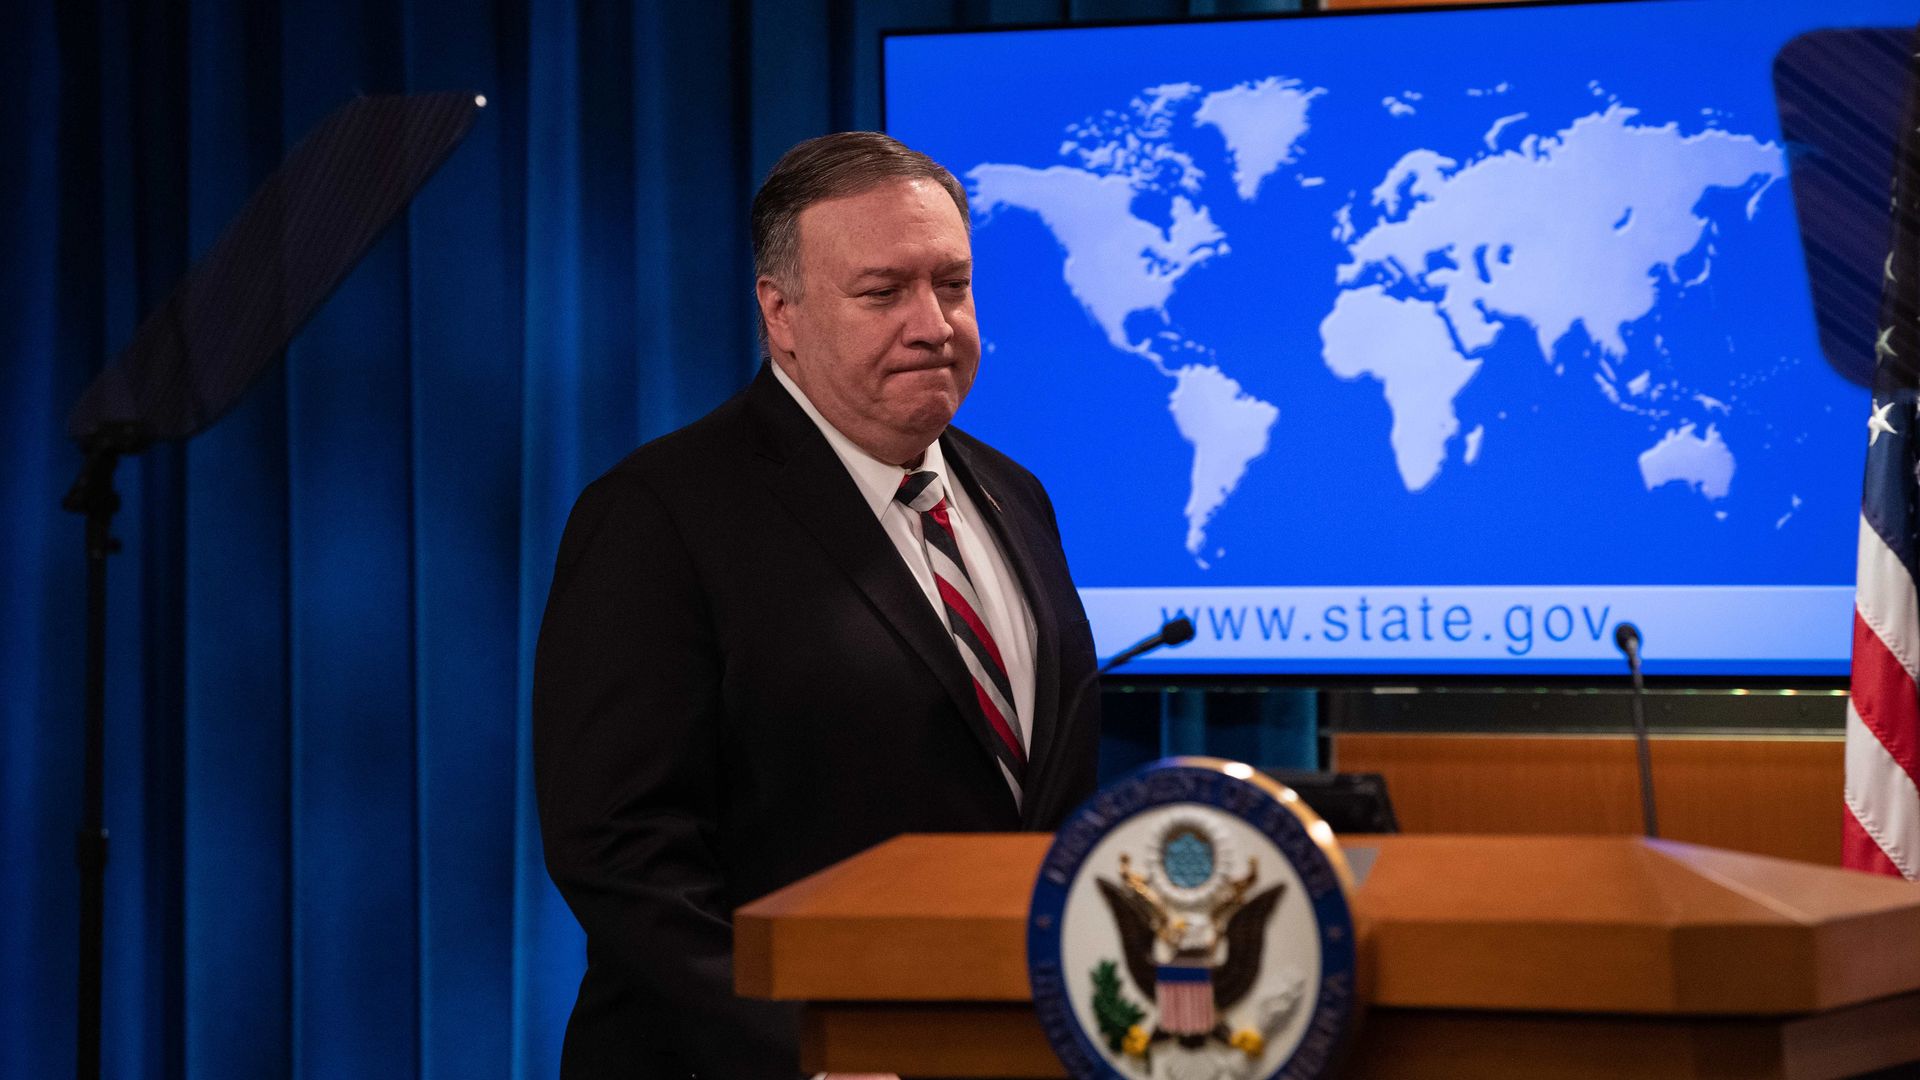 In this image, Mike Pompeo stands in front of a map of the world